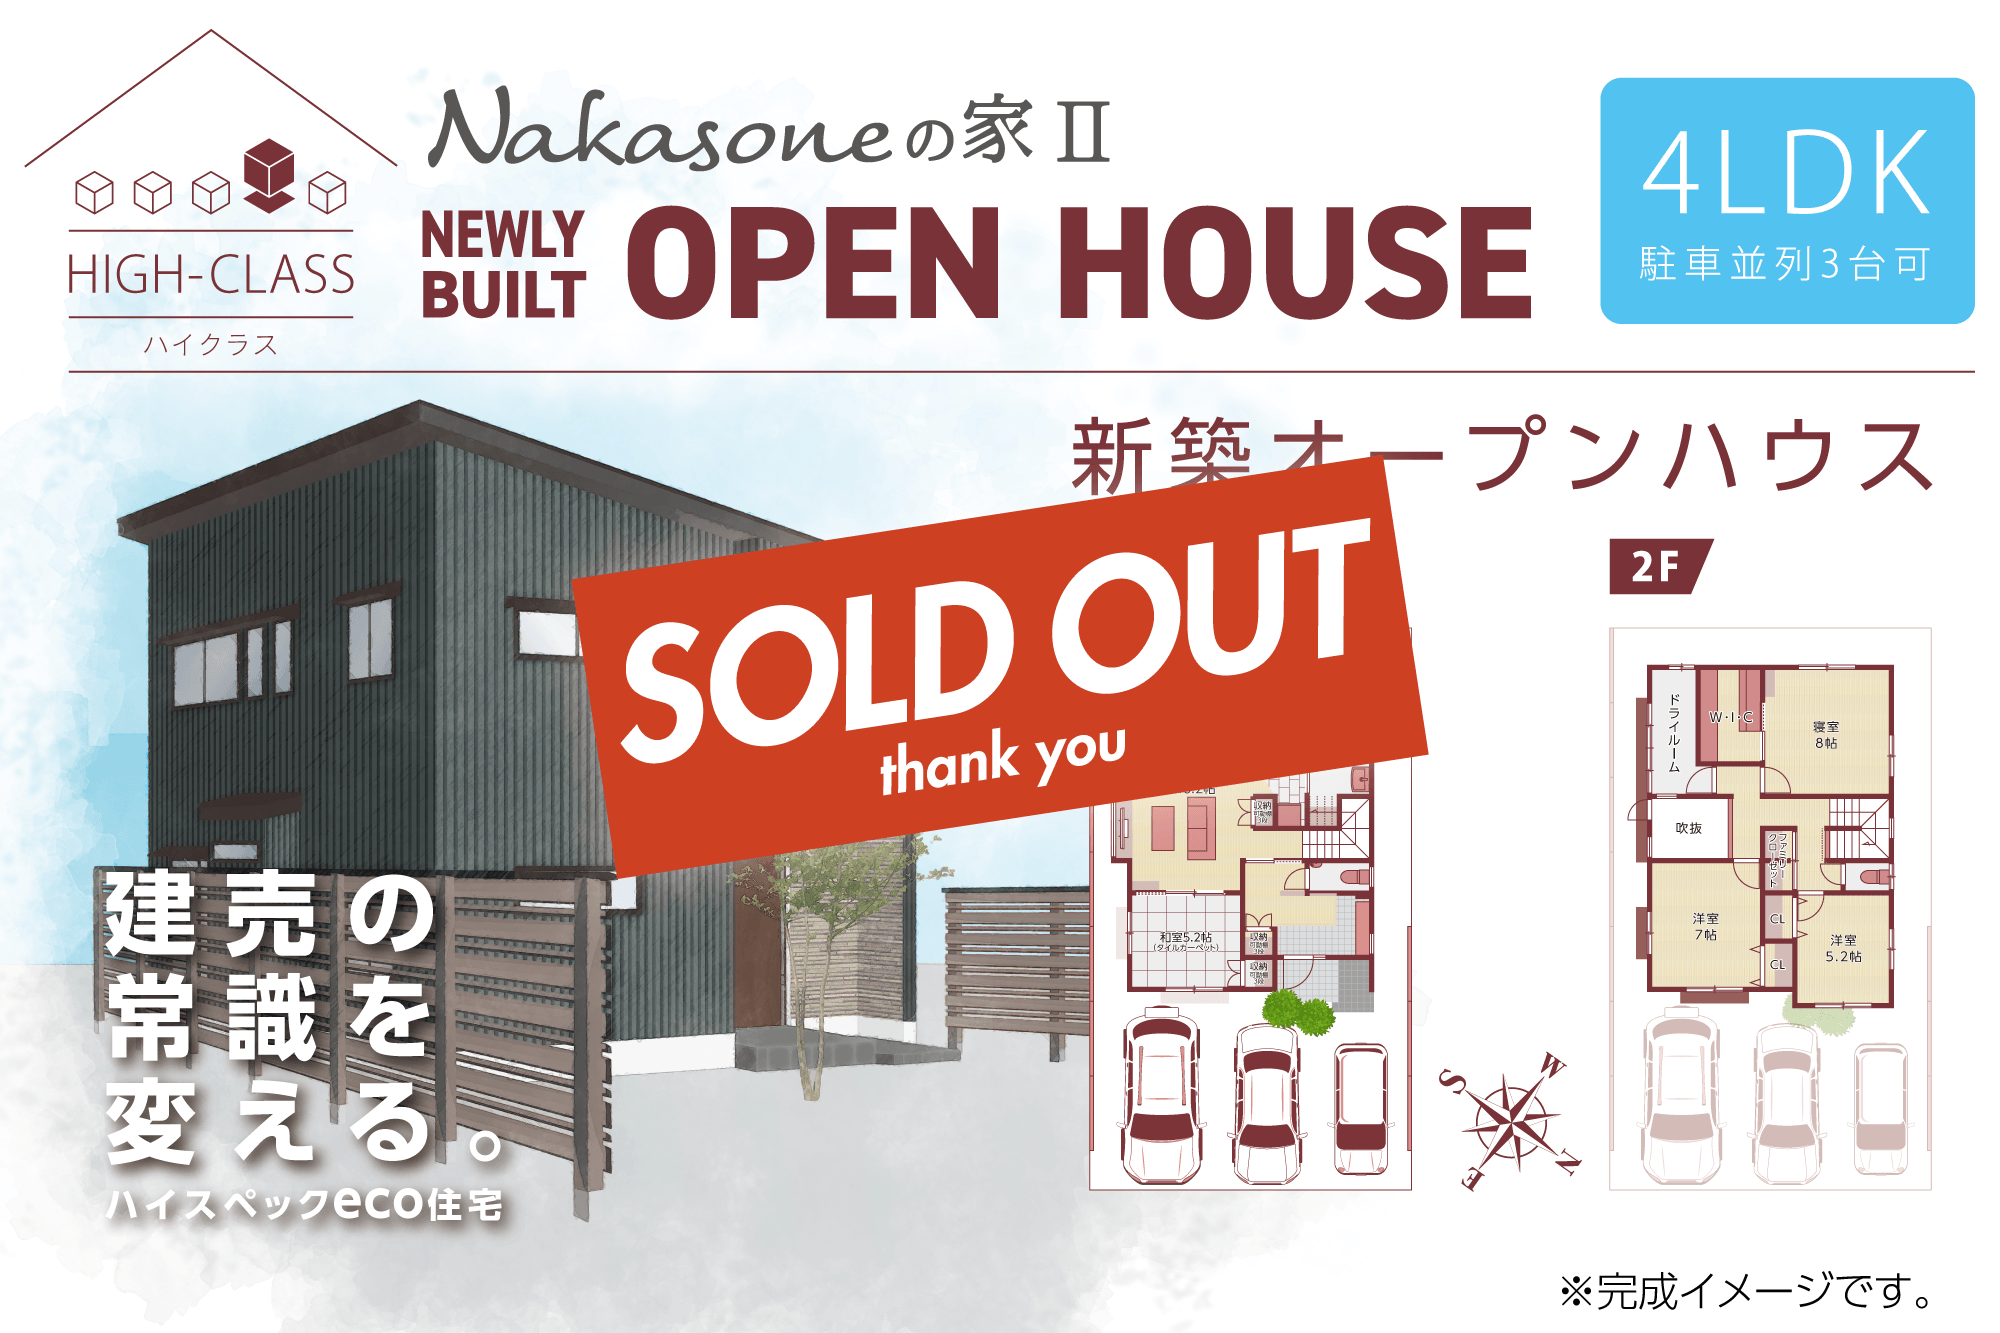 NAKASONEの家Ⅱ Thank you SOLD OUT